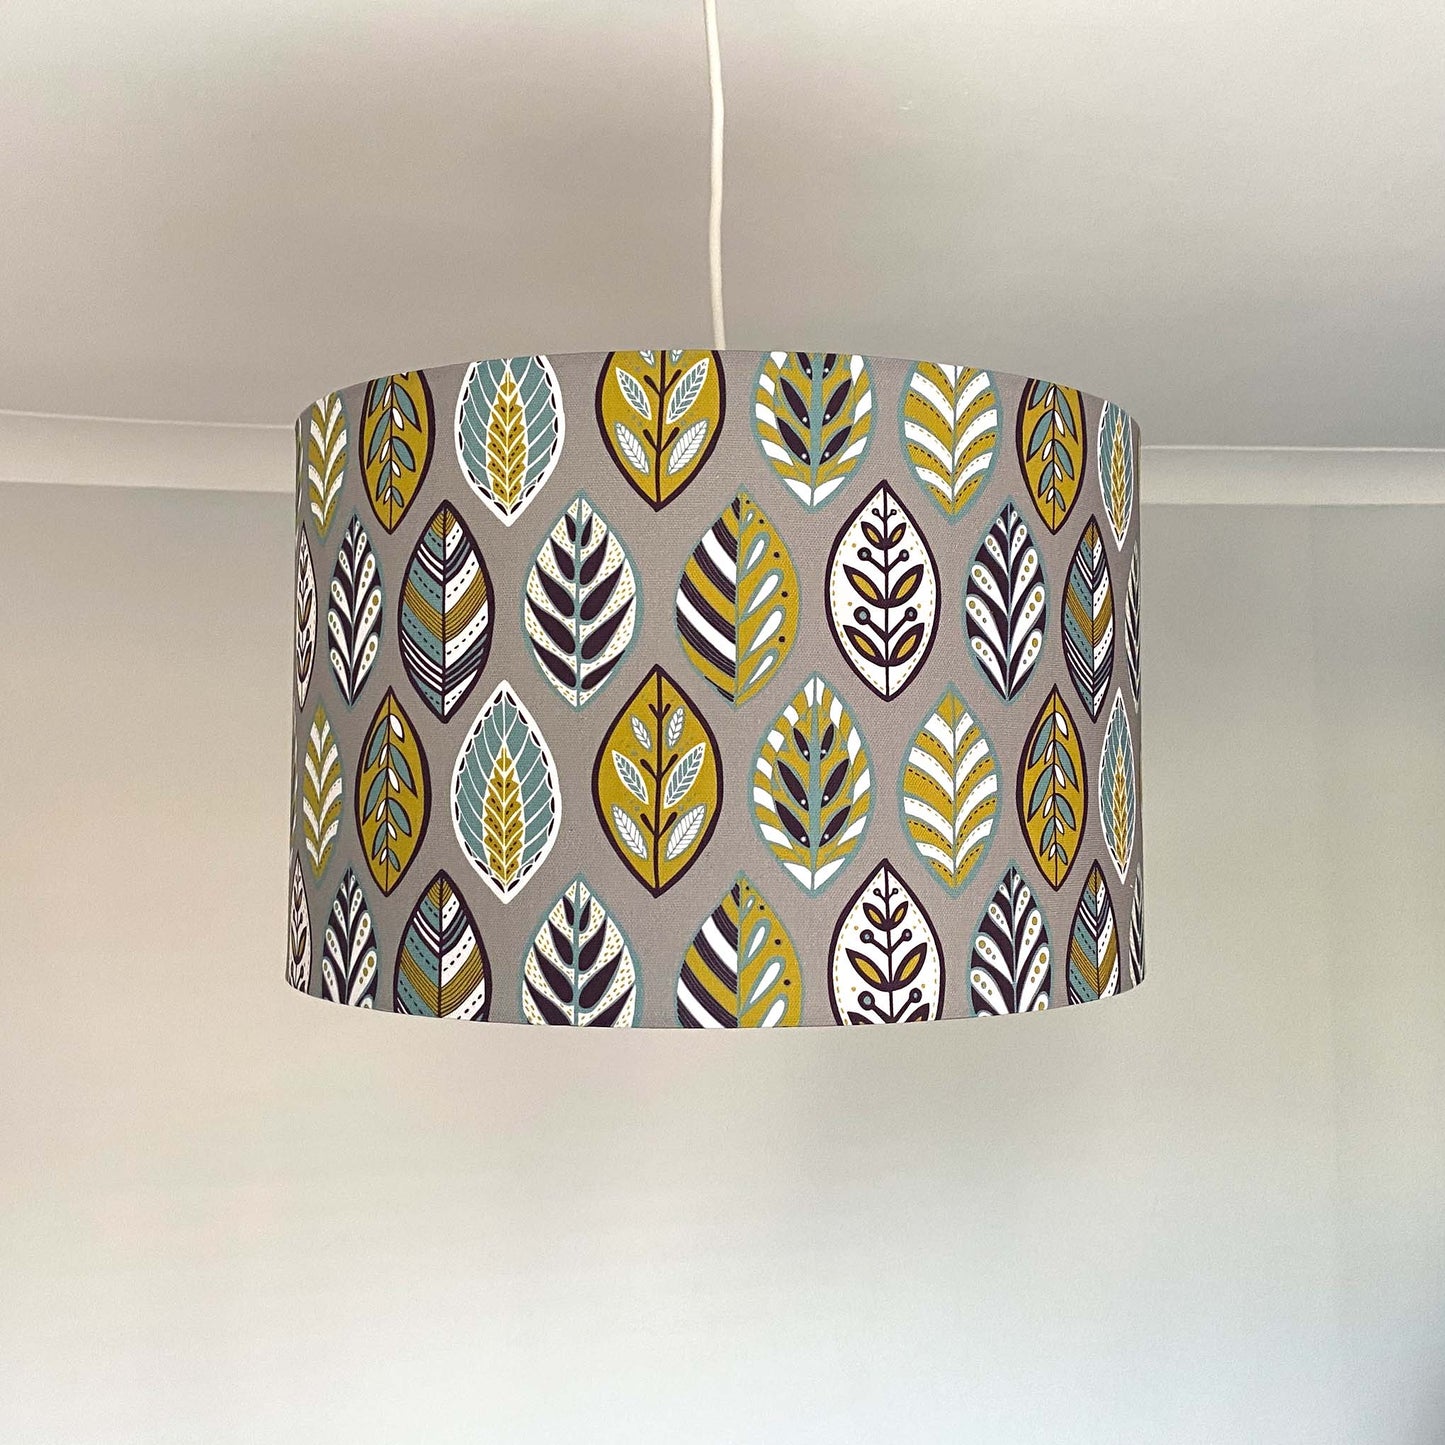 Large Grey Oak leaf Lampshade with a ceiling pendant fitting.  This pattern features Blue, Yellow, White and Aubergine leaf Pattern in a Skandinavian style on a Grey background.